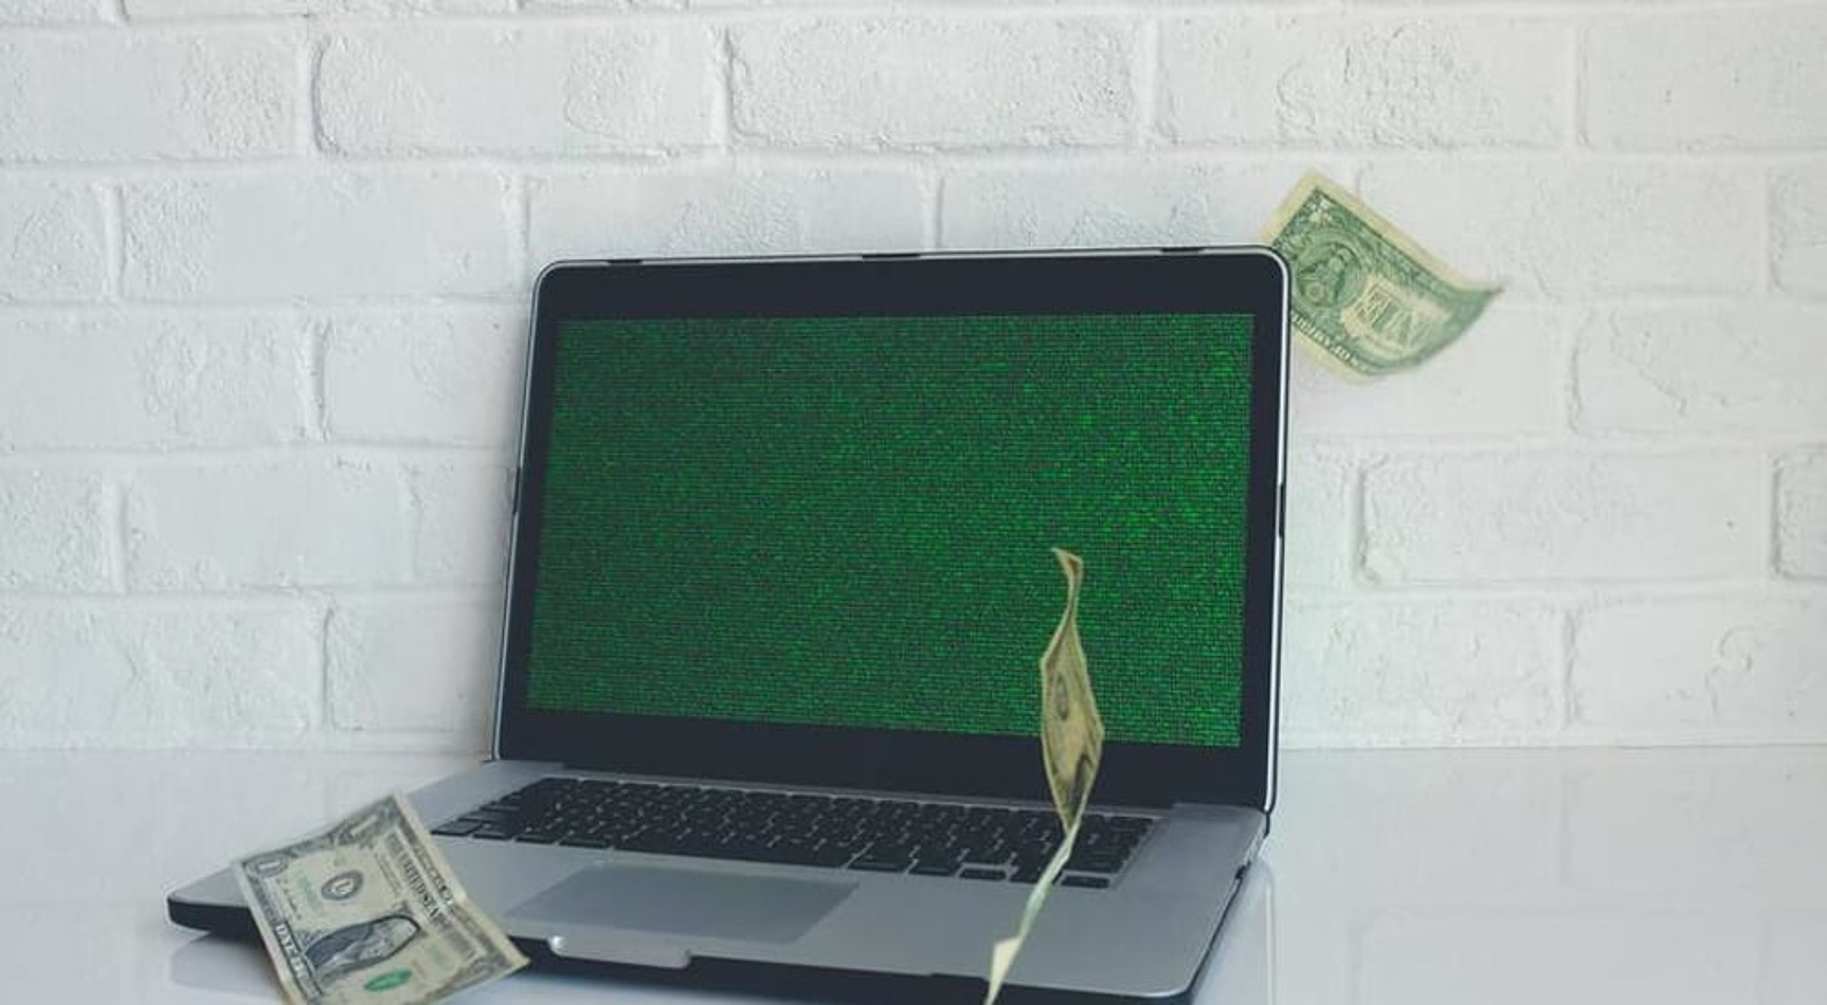 Dollar bills falling around an open laptop on a table